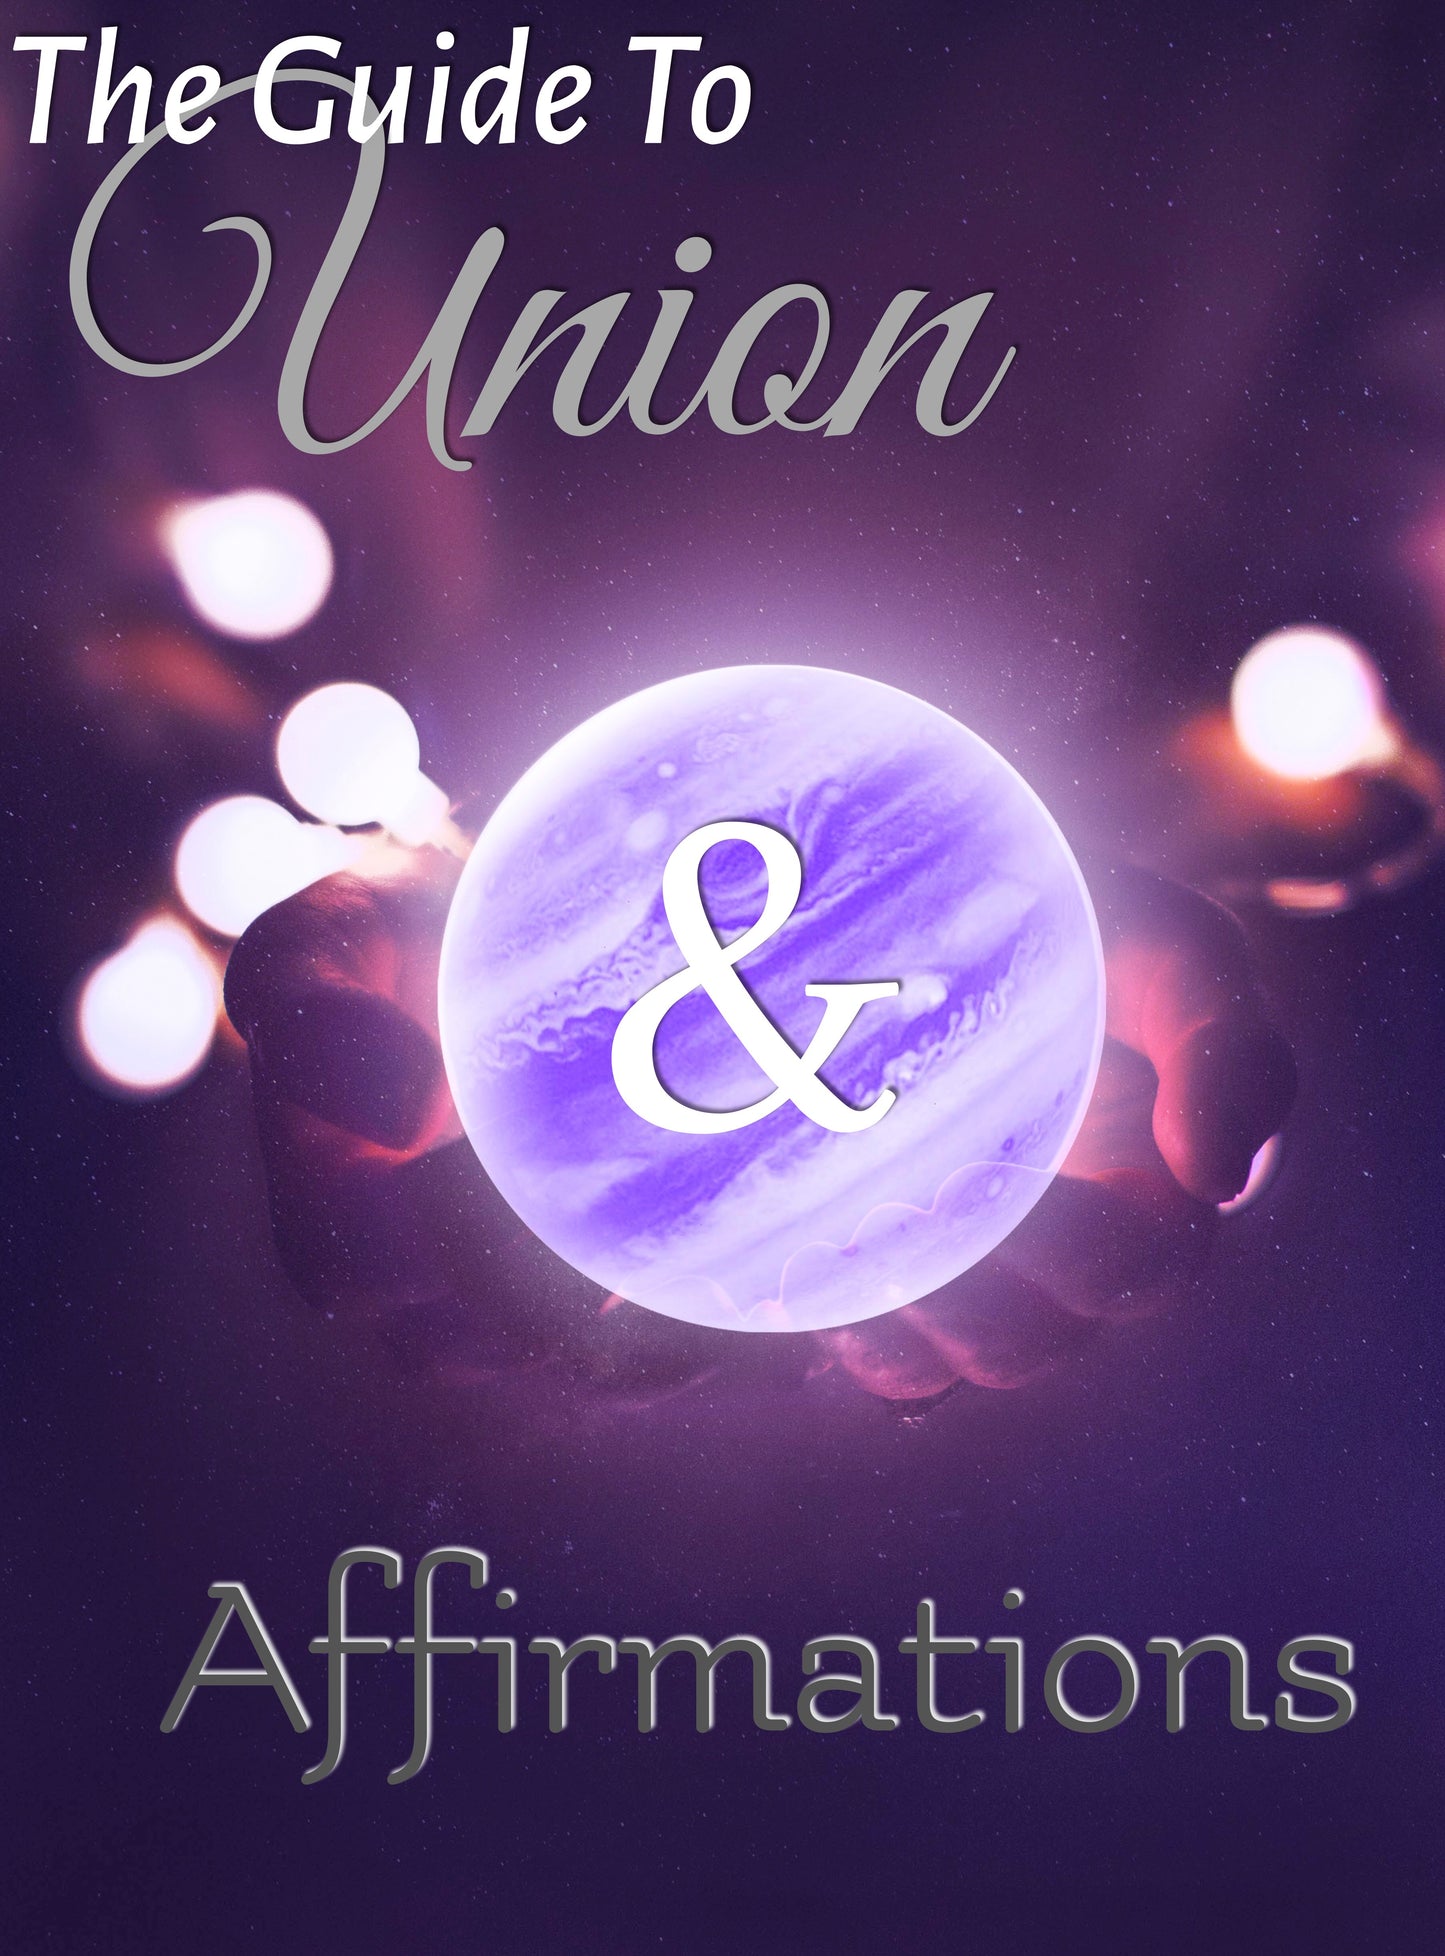 GET BOTH: The Complete Guide + Affirmations